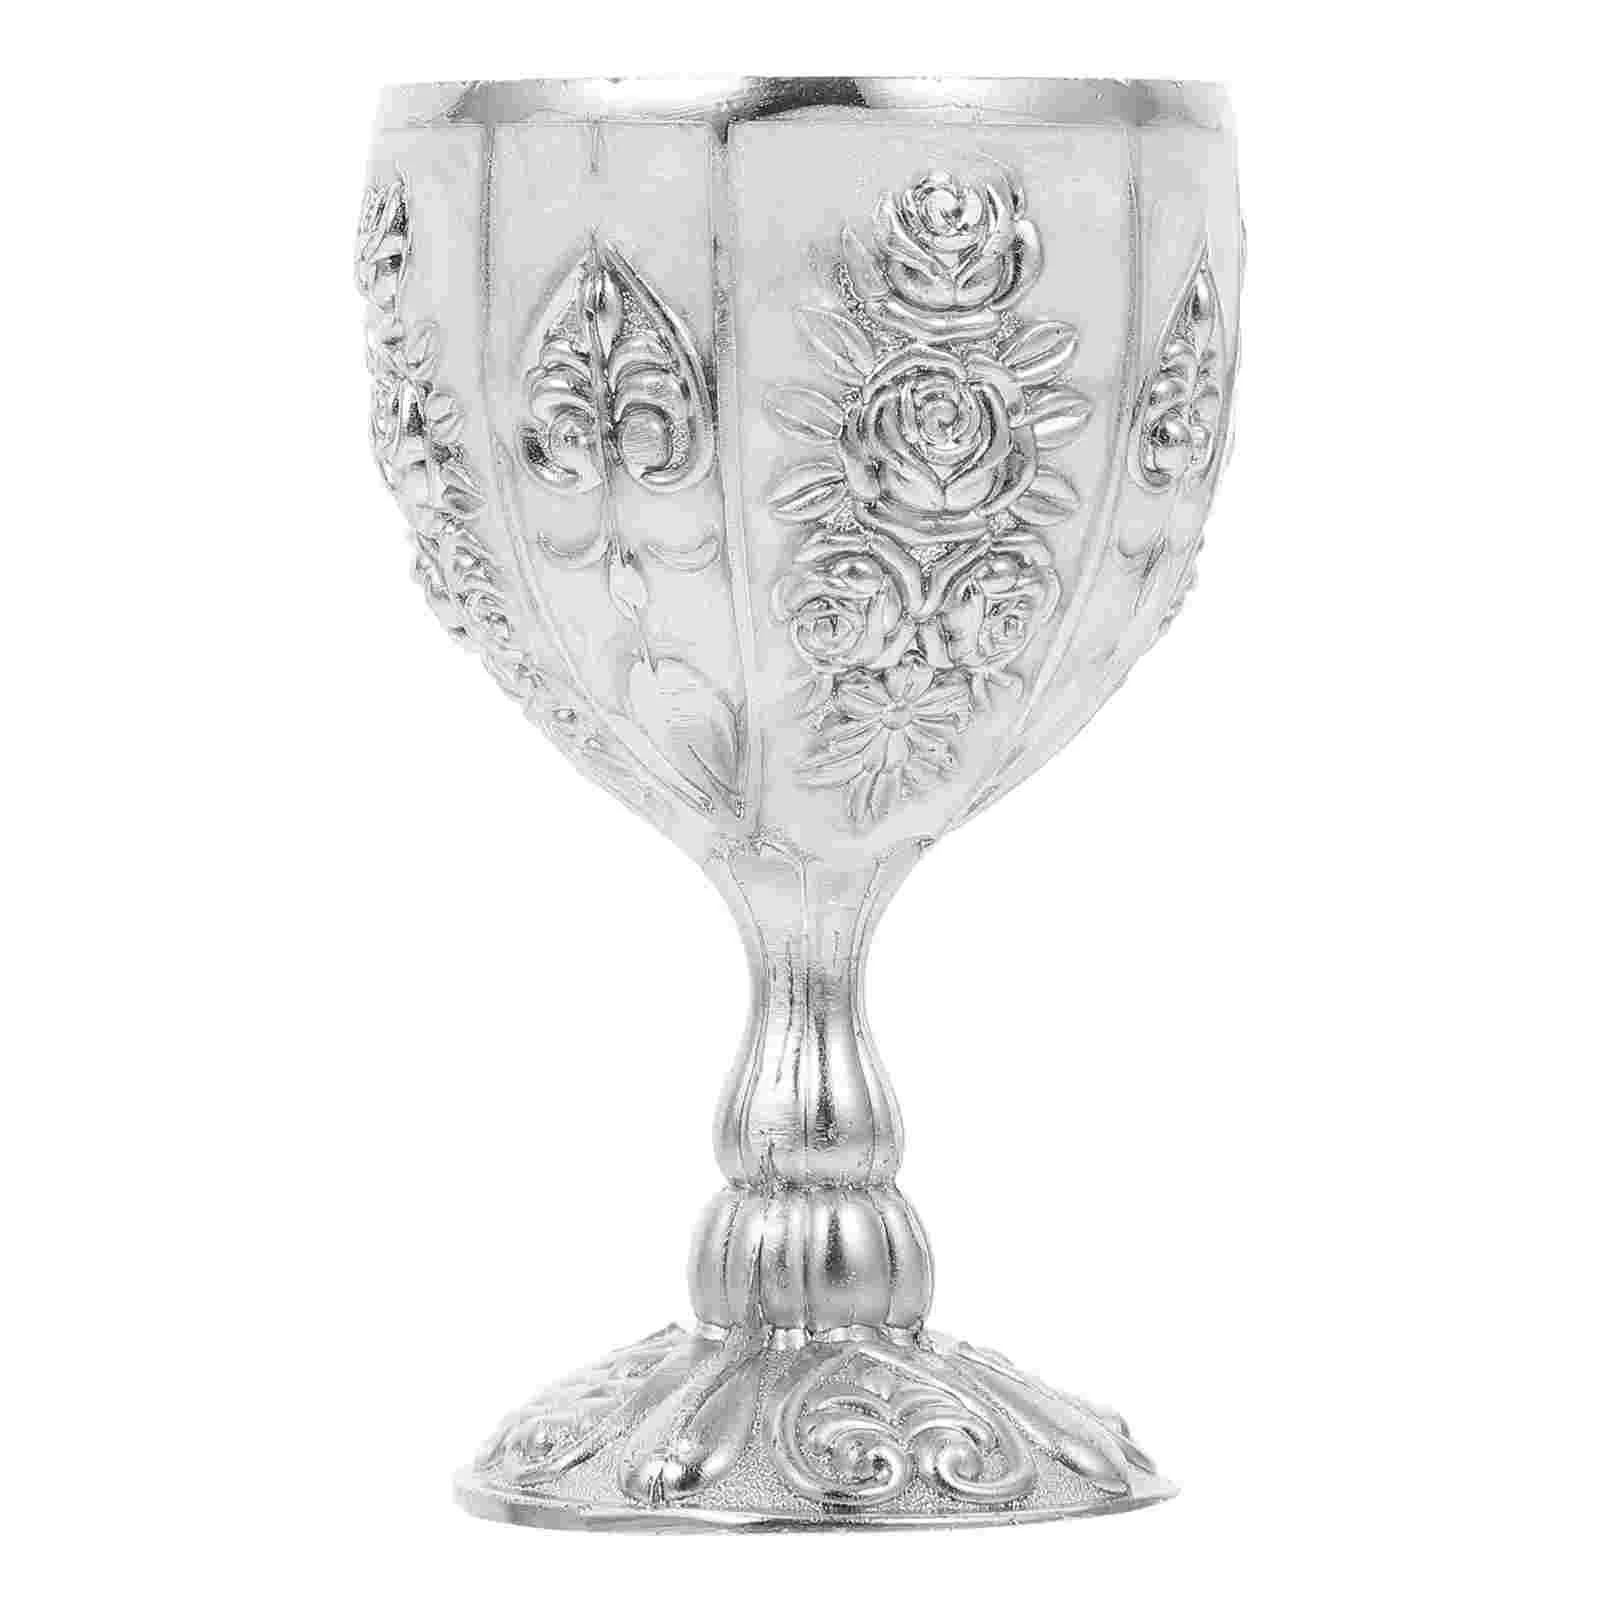 

Cup Goblet Chalice Glasses Vintage Metal Cups Retro Cocktail European Champagne Medieval Drinking Style Royal Goblets Water